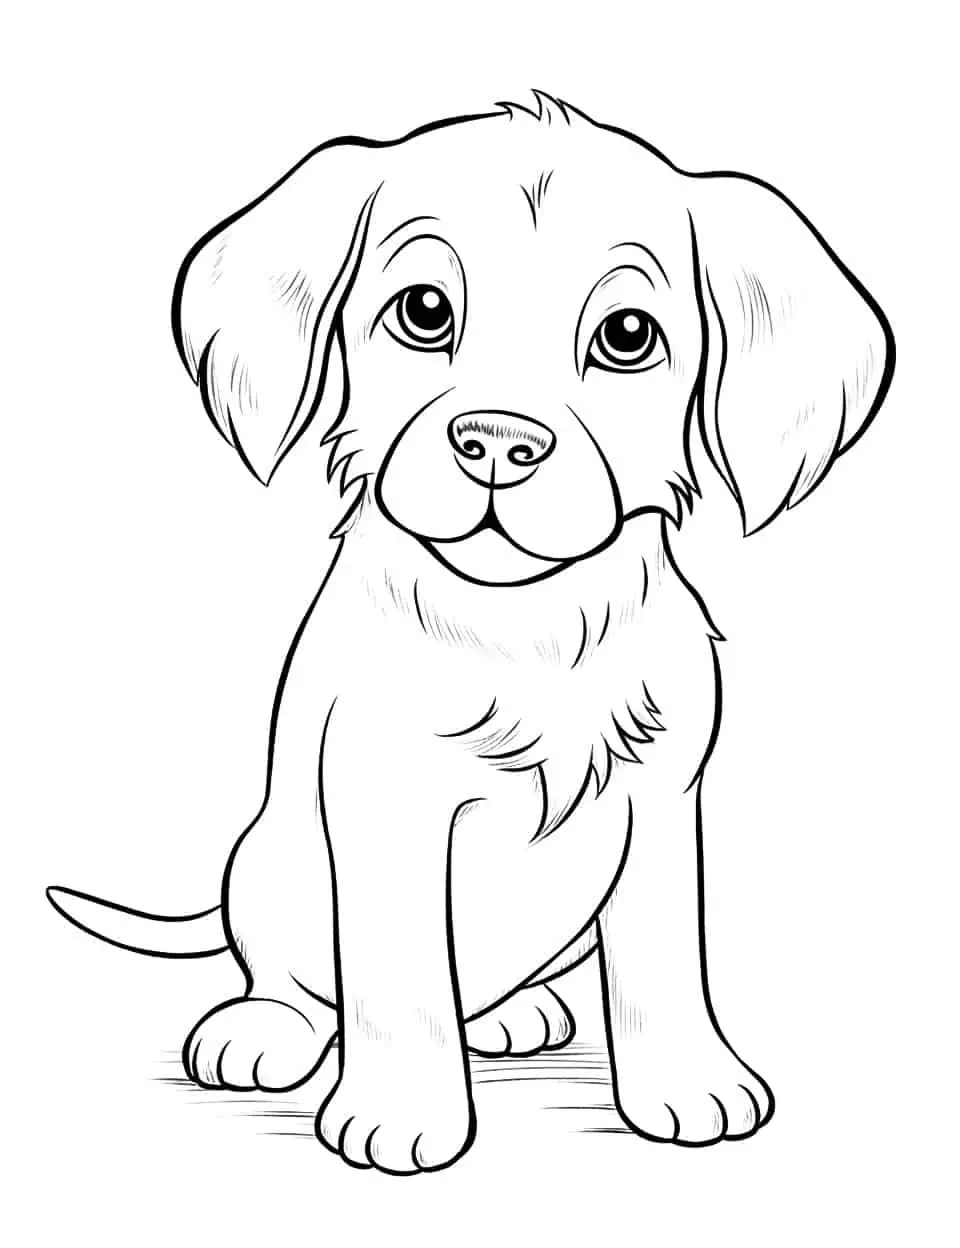 Easy Labrador Drawing Coloring Page - A simple line drawing of a Labrador puppy, perfect for young kids.